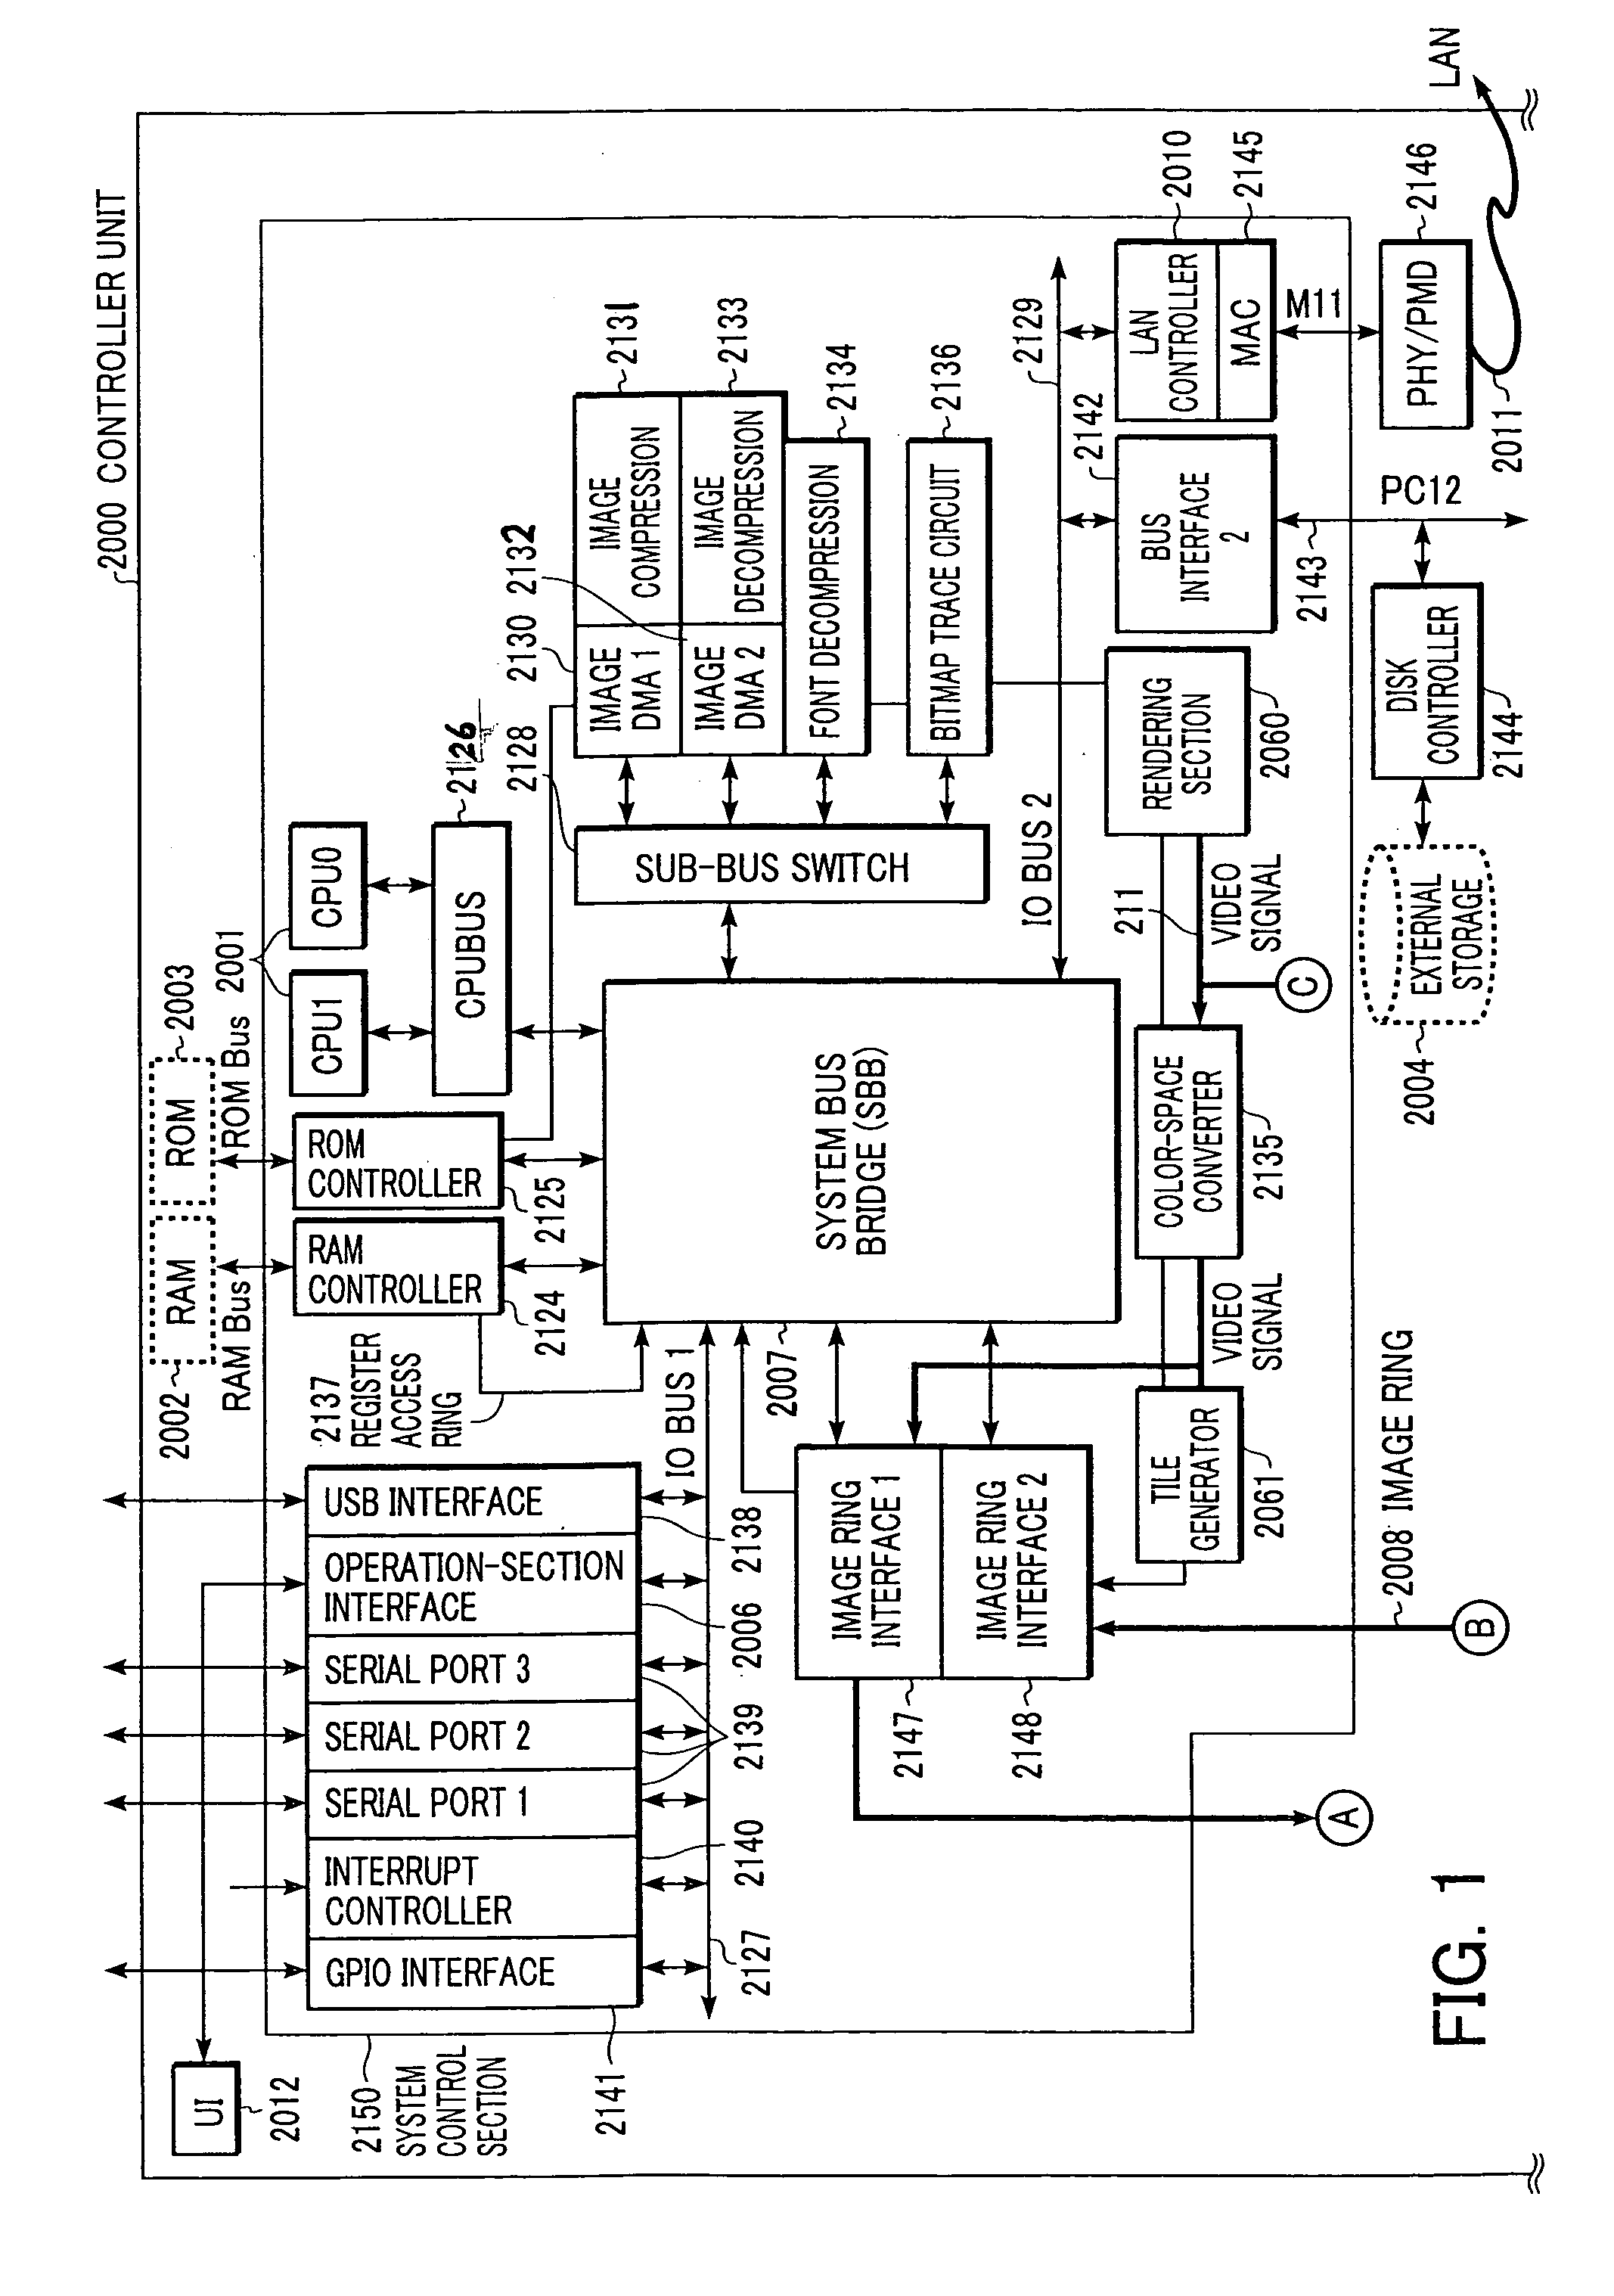 Image-forming controller, method therefor, program, and storage medium